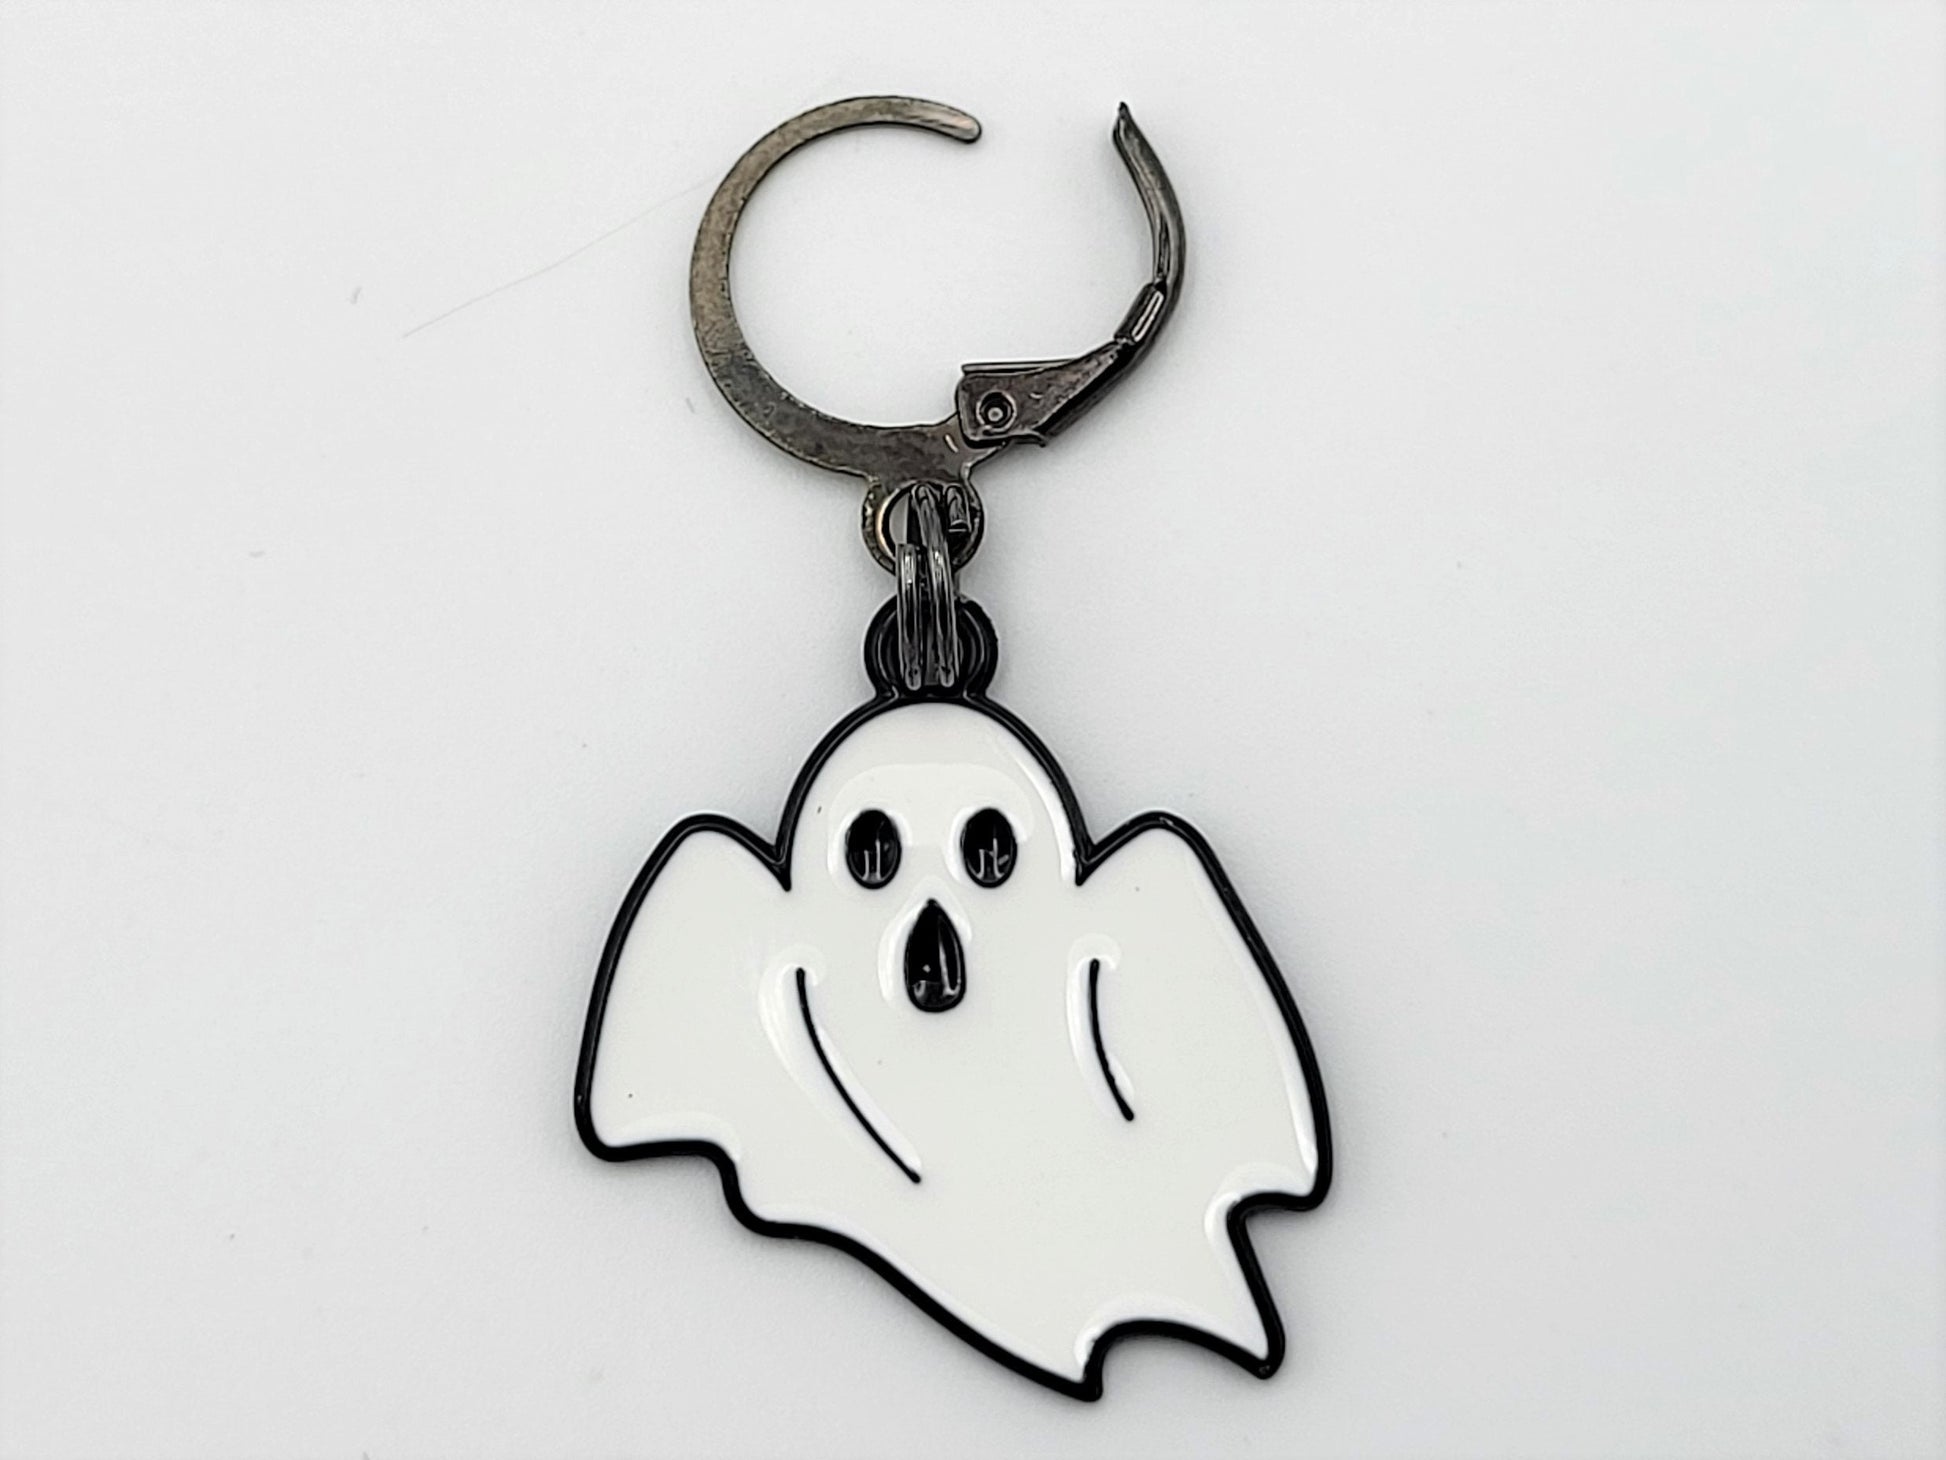 Halloween Ghost Stitch Markers for Knitting 2pc | Crochet stitch marker, progress keeper, project bag charm, crochet accessory